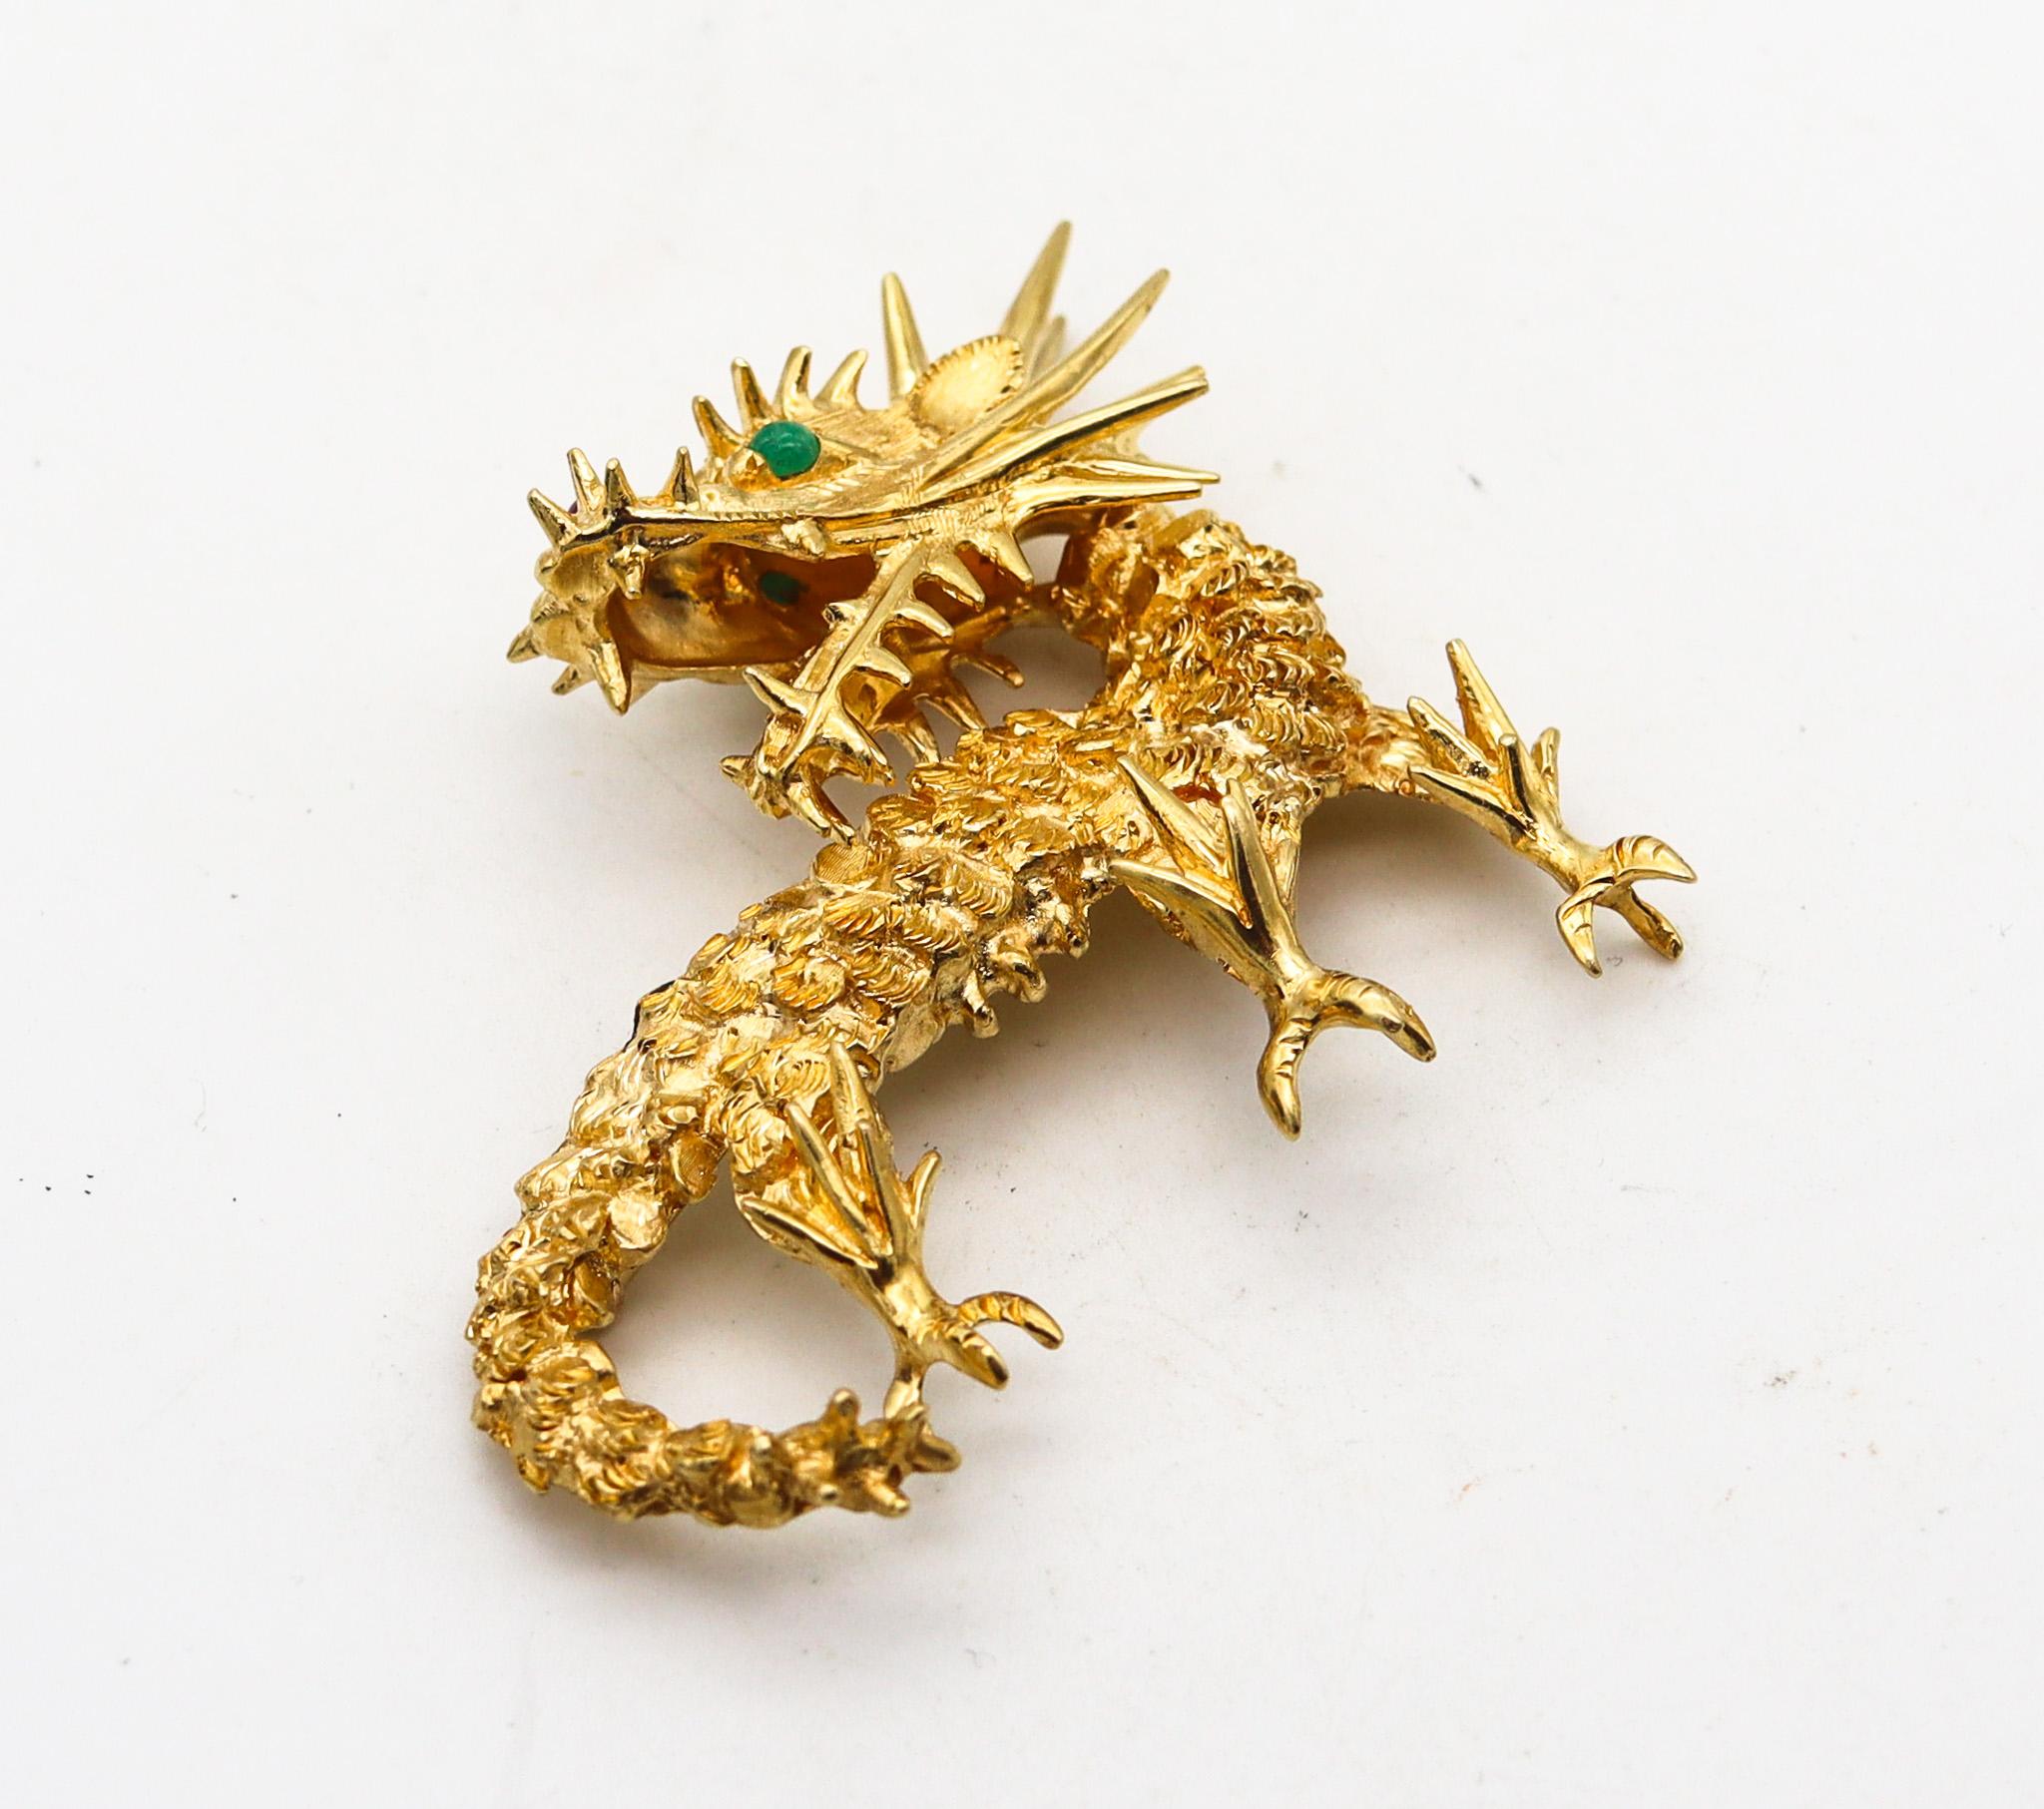 Modernist Cartier 1970 Sculpted Dragon Brooch In 18Kt Yellow Gold With Rubies And Emerald For Sale